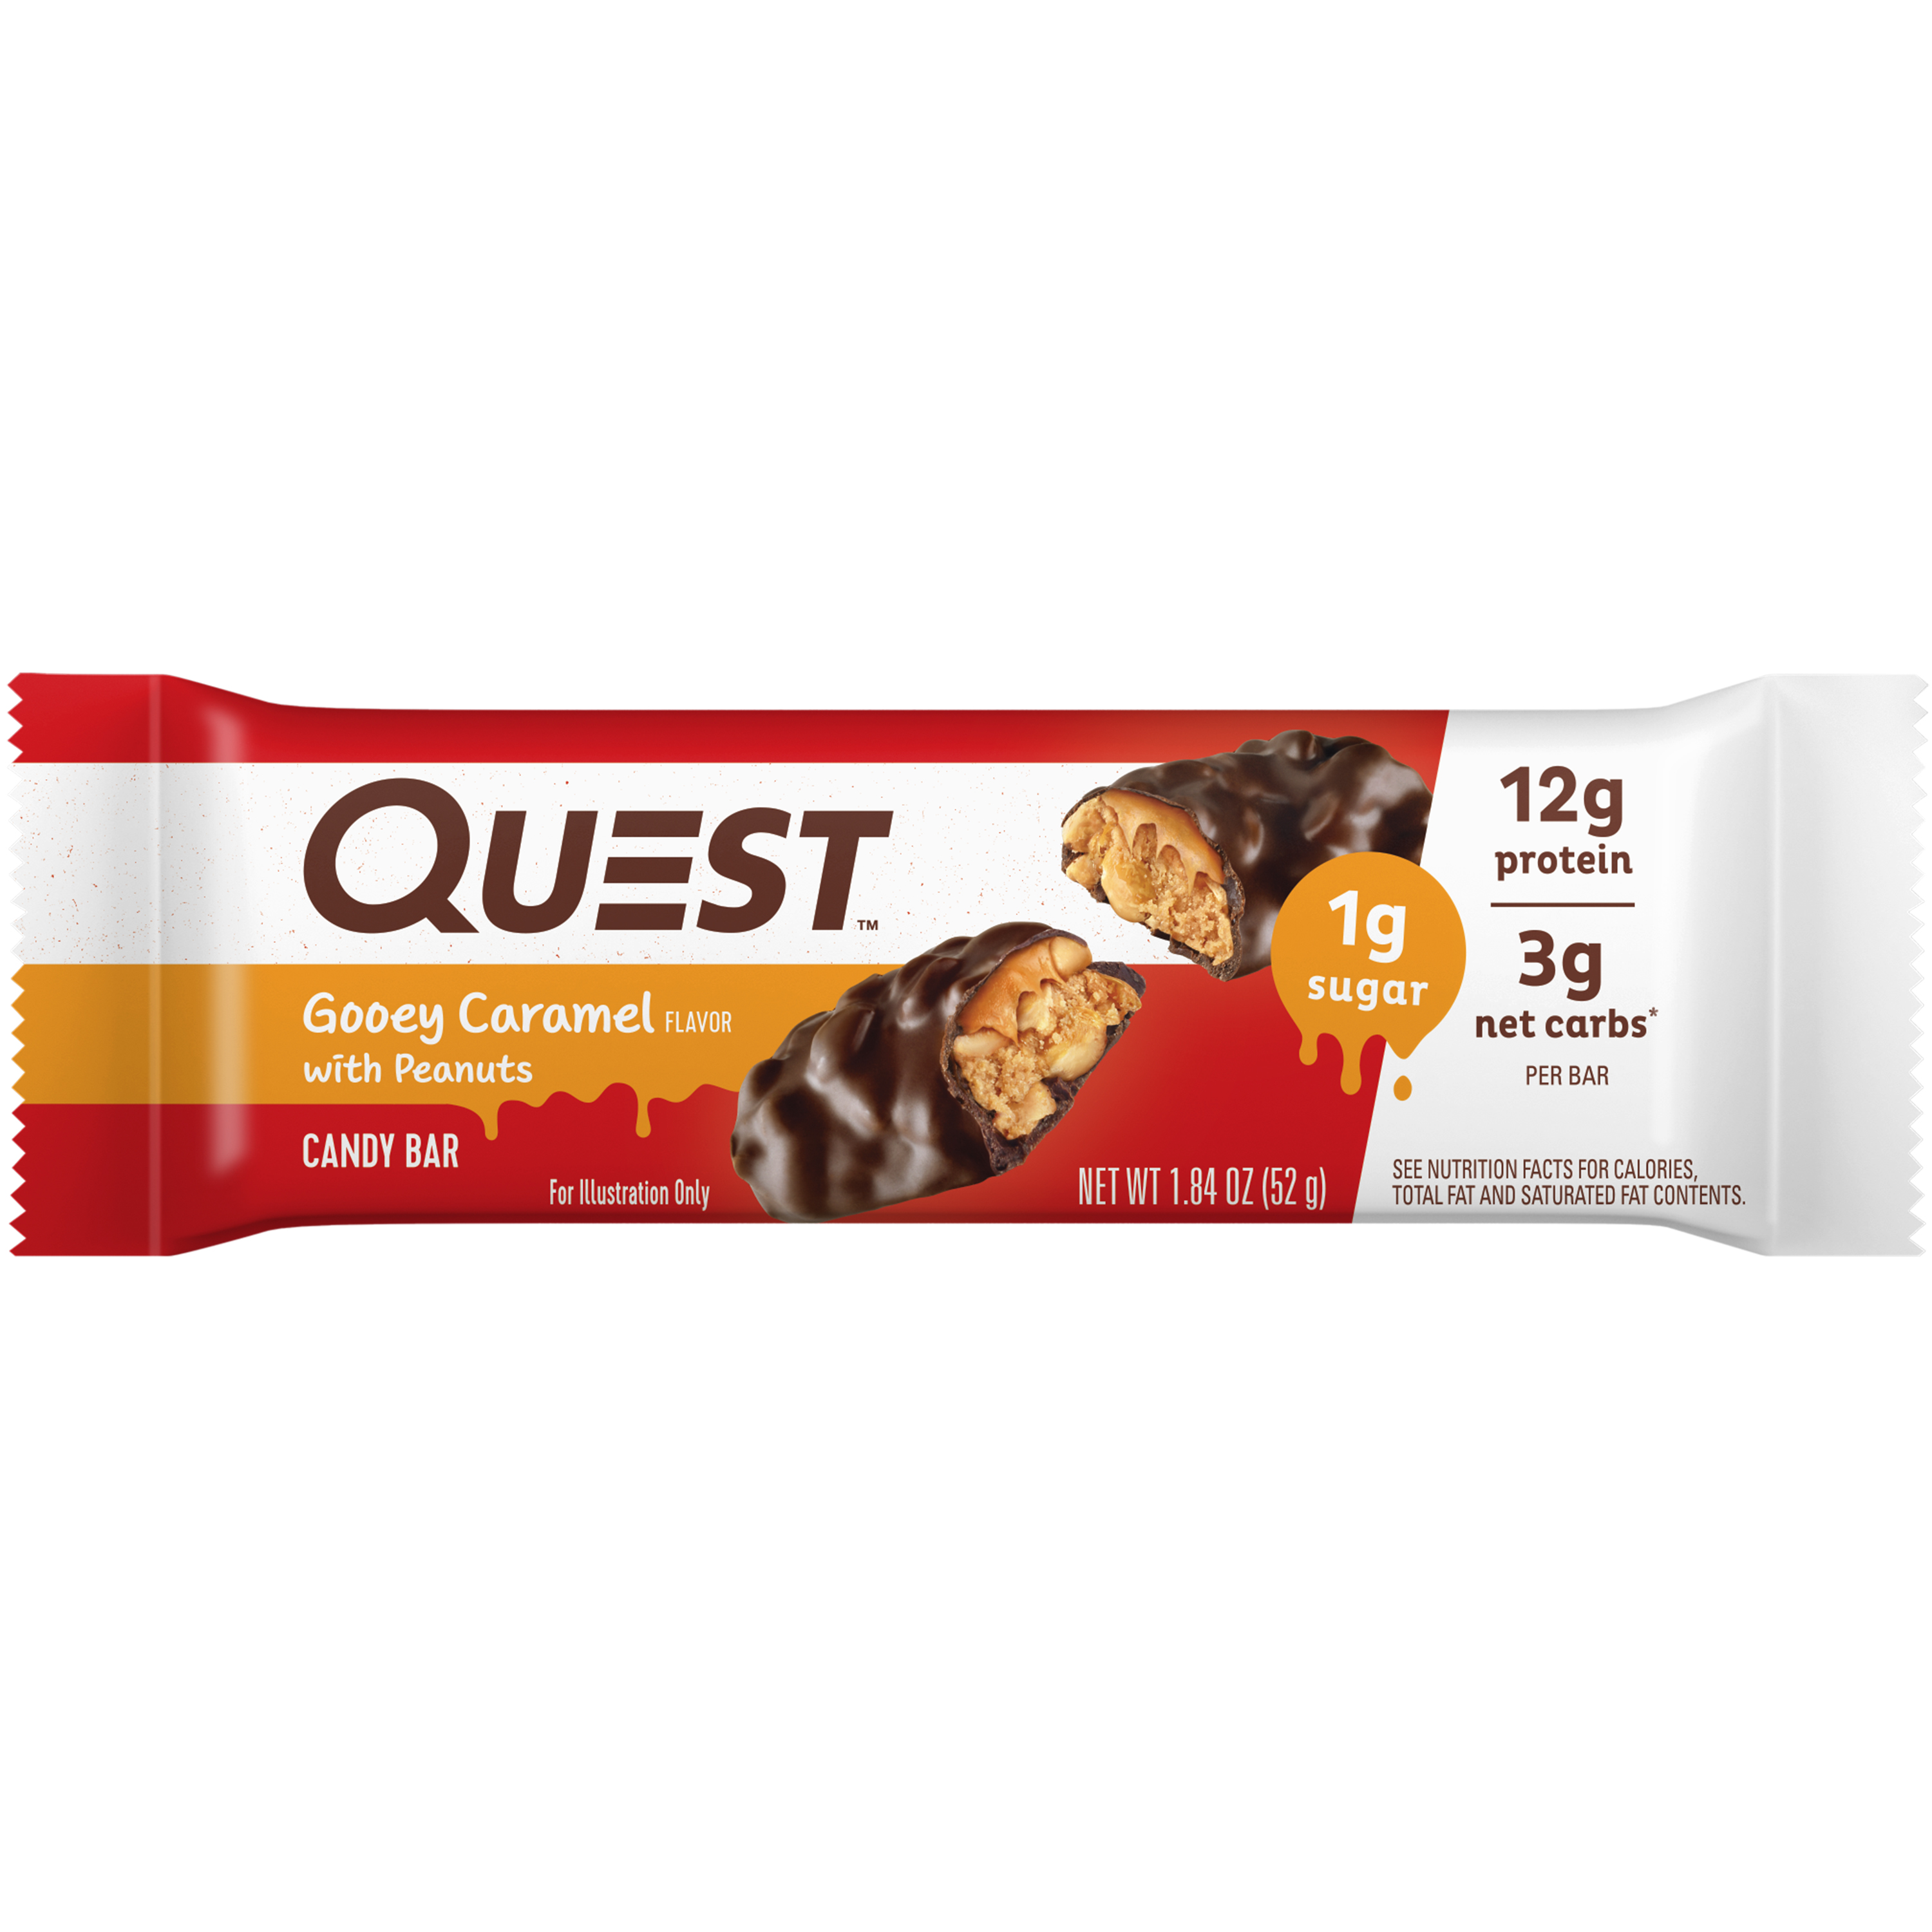 Quest Protein Candy Bar Snacks, Gooey Caramel with Peanuts flavor,  12 Count - image 5 of 11